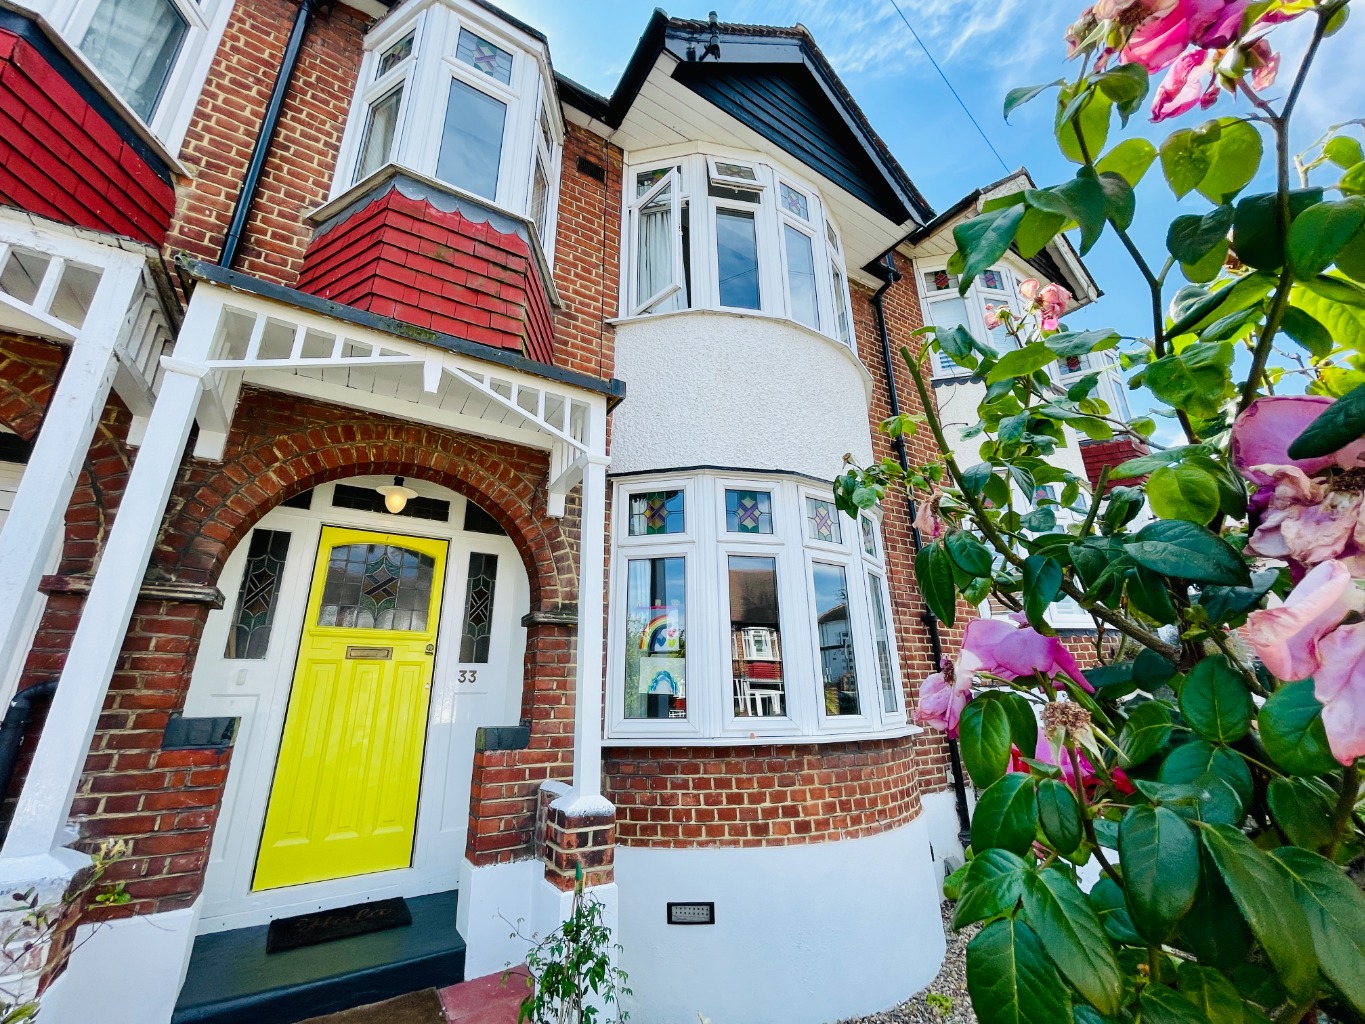 Beaumont Gibbs are offering this stunning mid terrace house for sale, this property is located on 